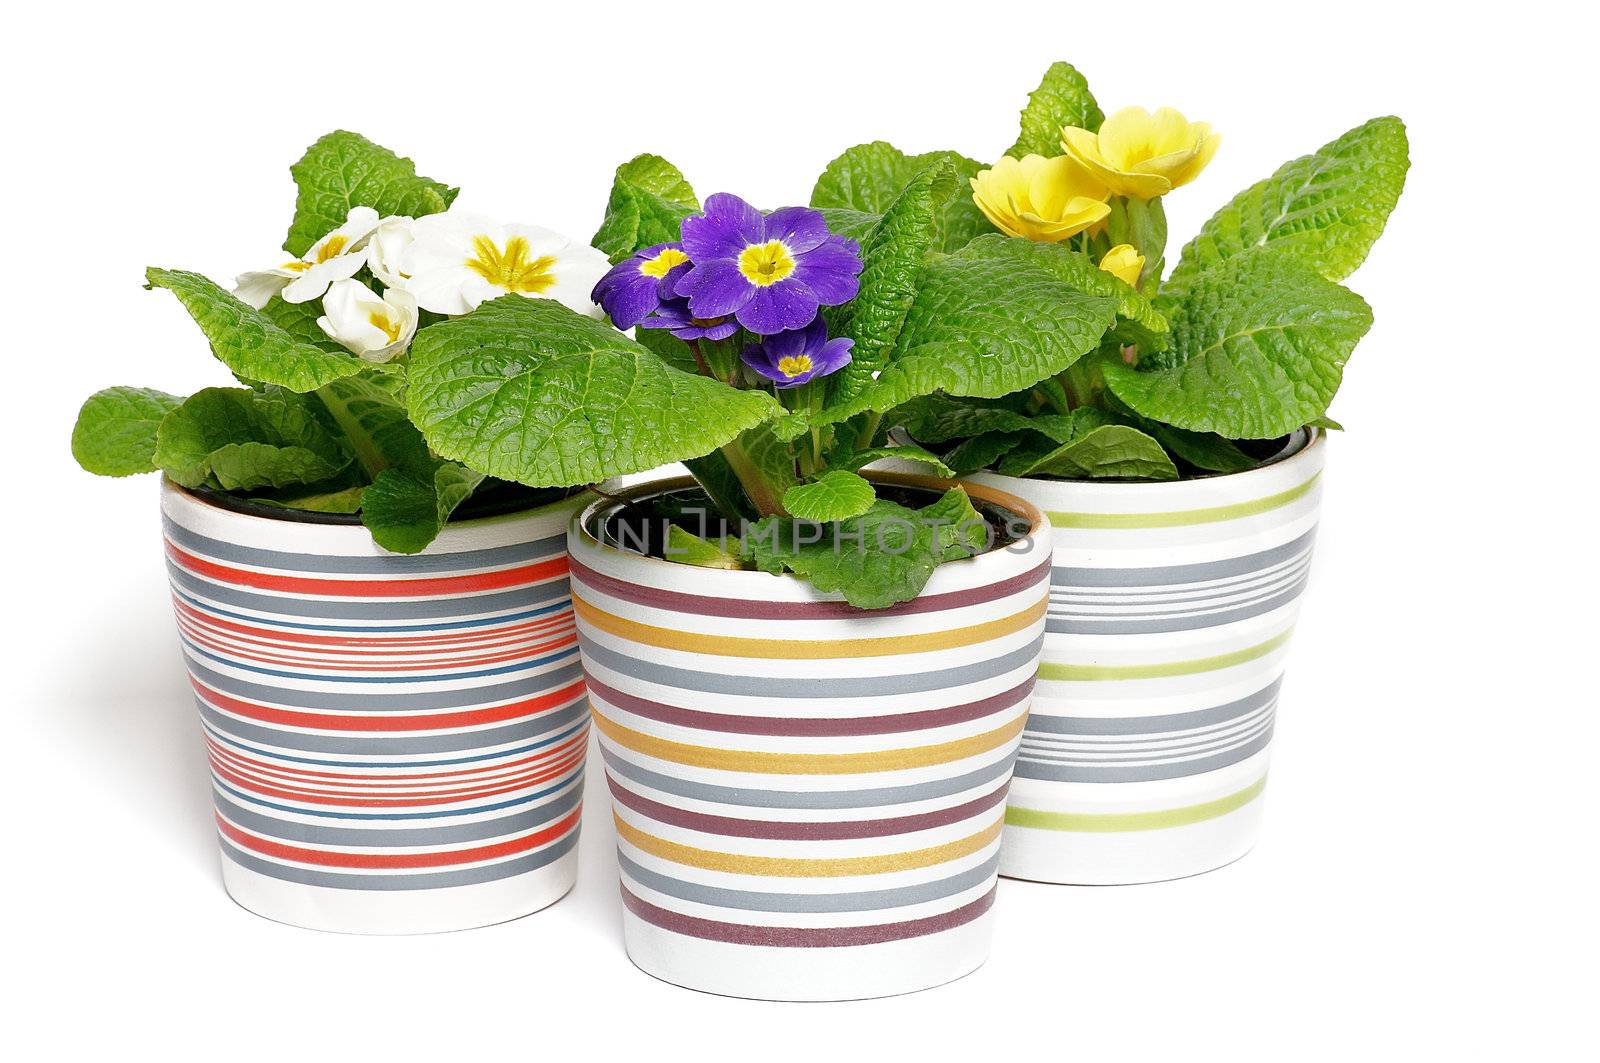 Multi-colored Primeroses in striped flower pots isolated on white background